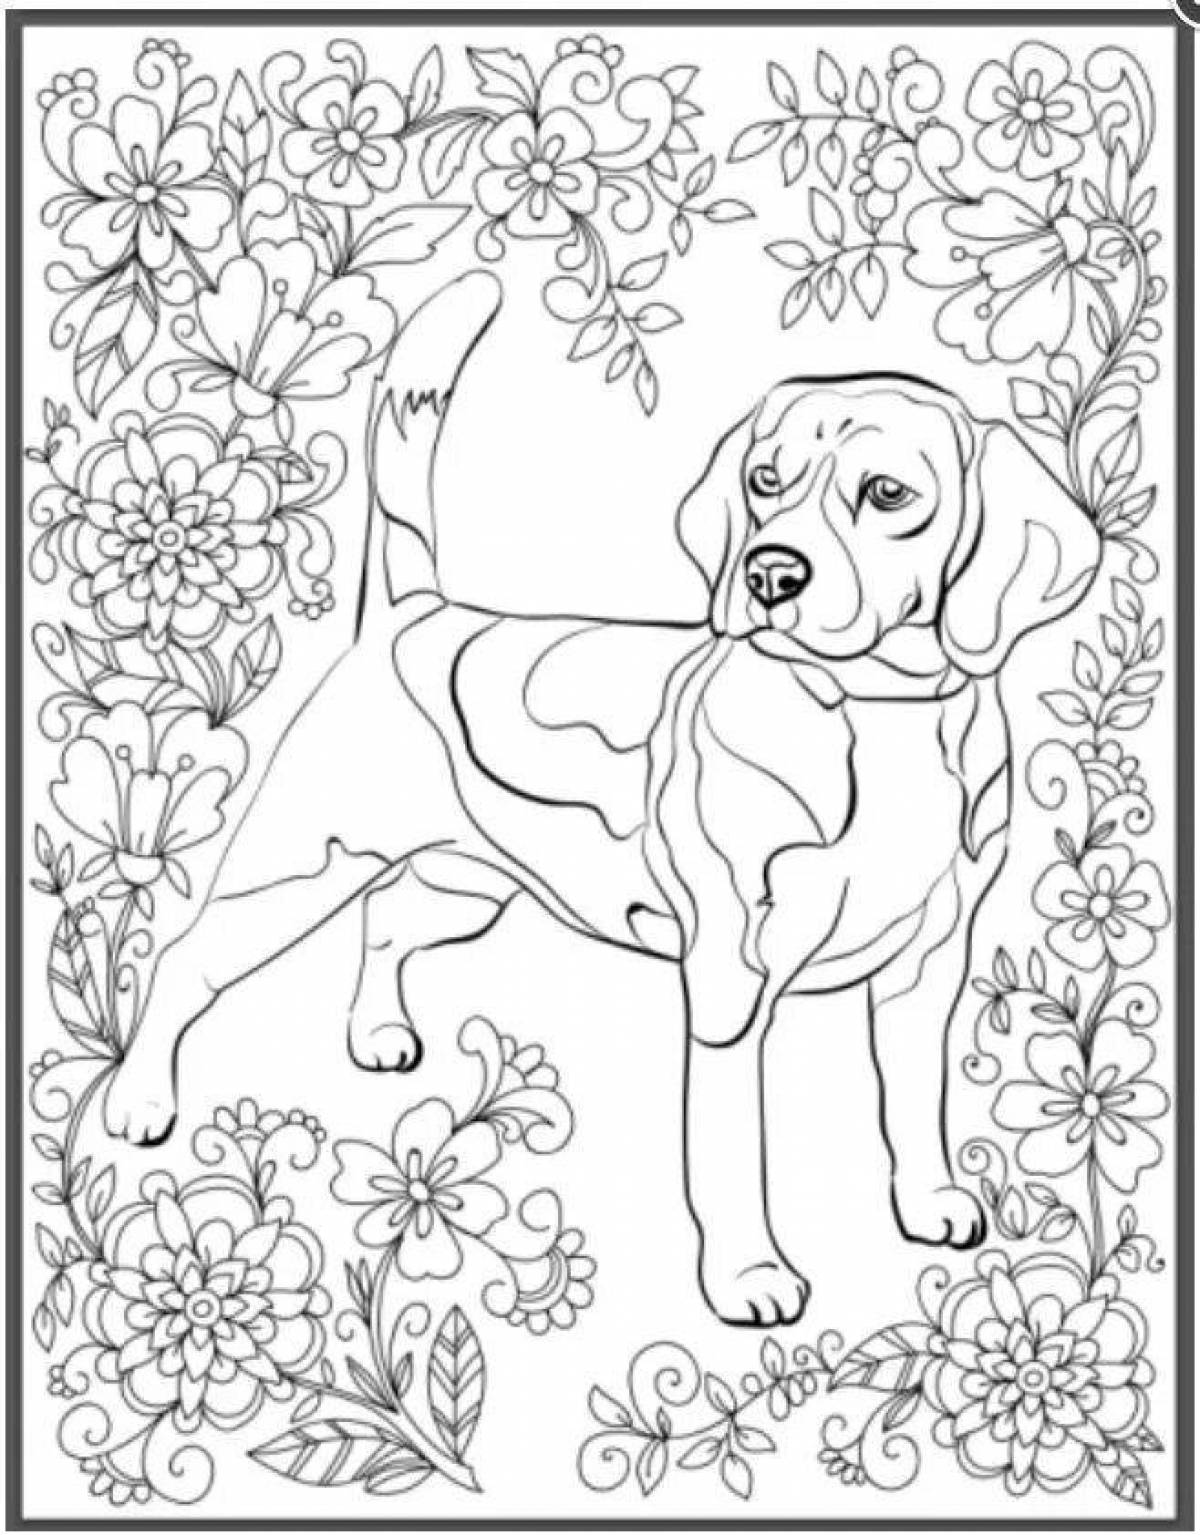 Bright dog coloring by numbers